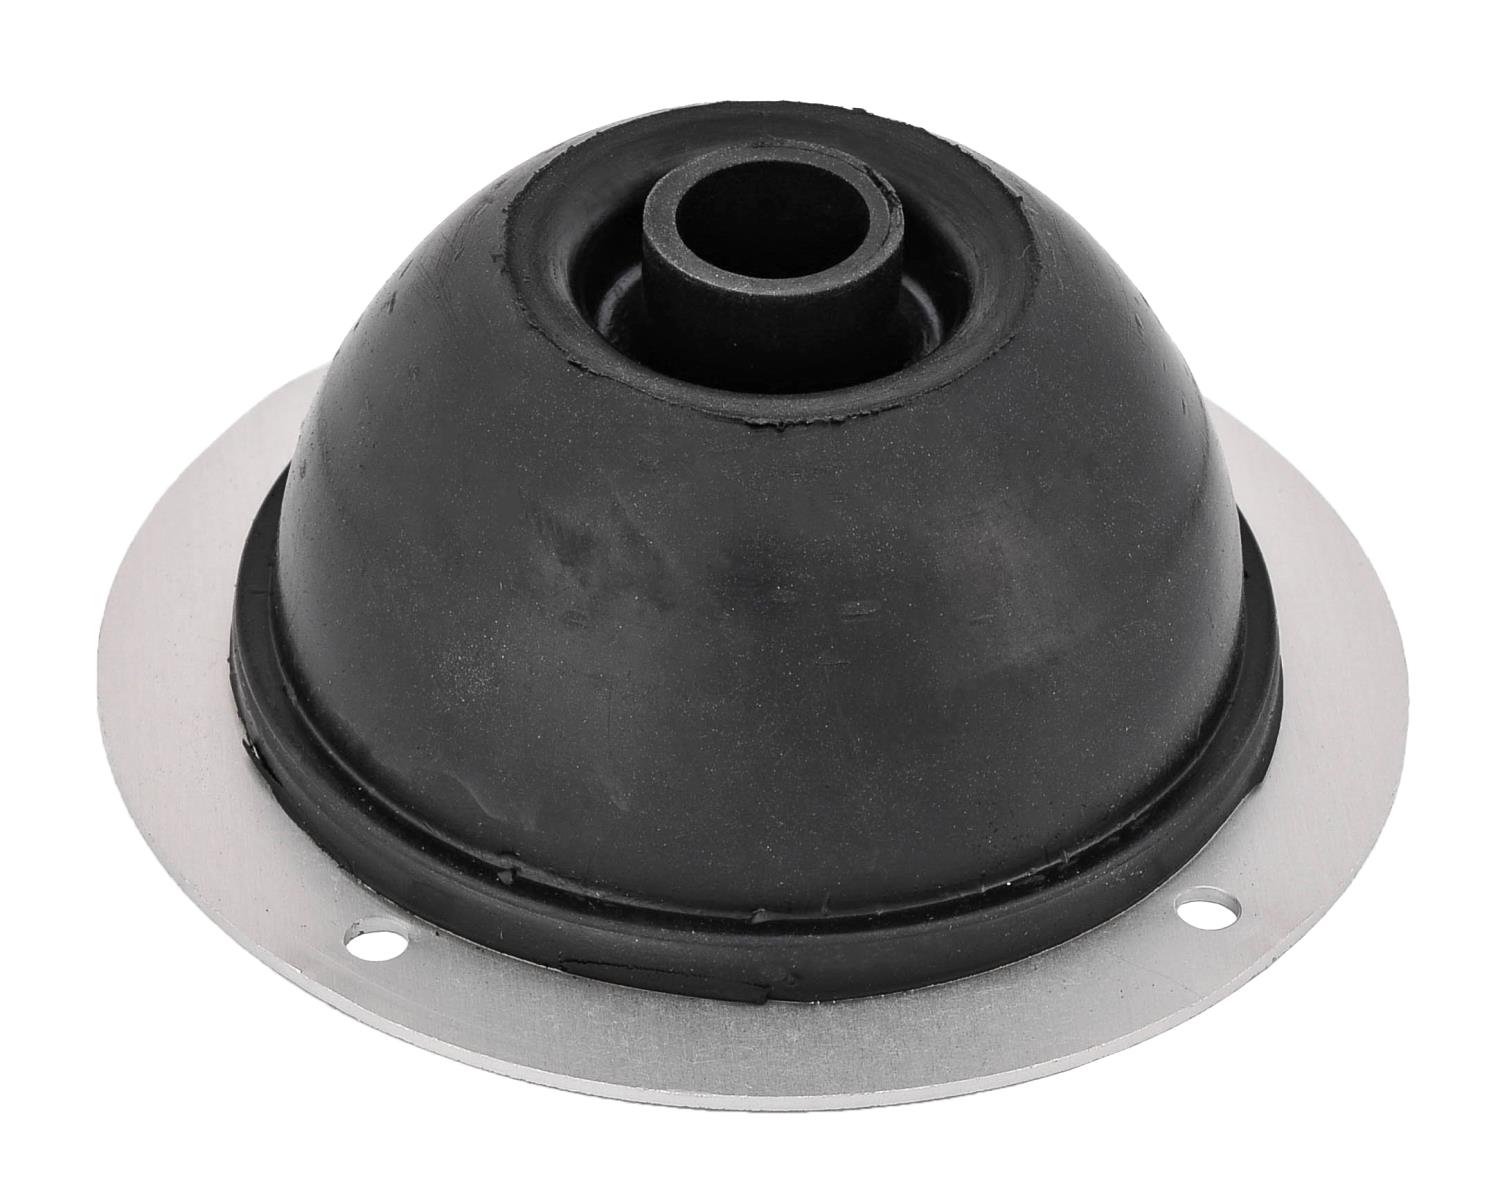 Firewall Grommet Seal, Round Bubble Style [.415 in. I.D. Hole]